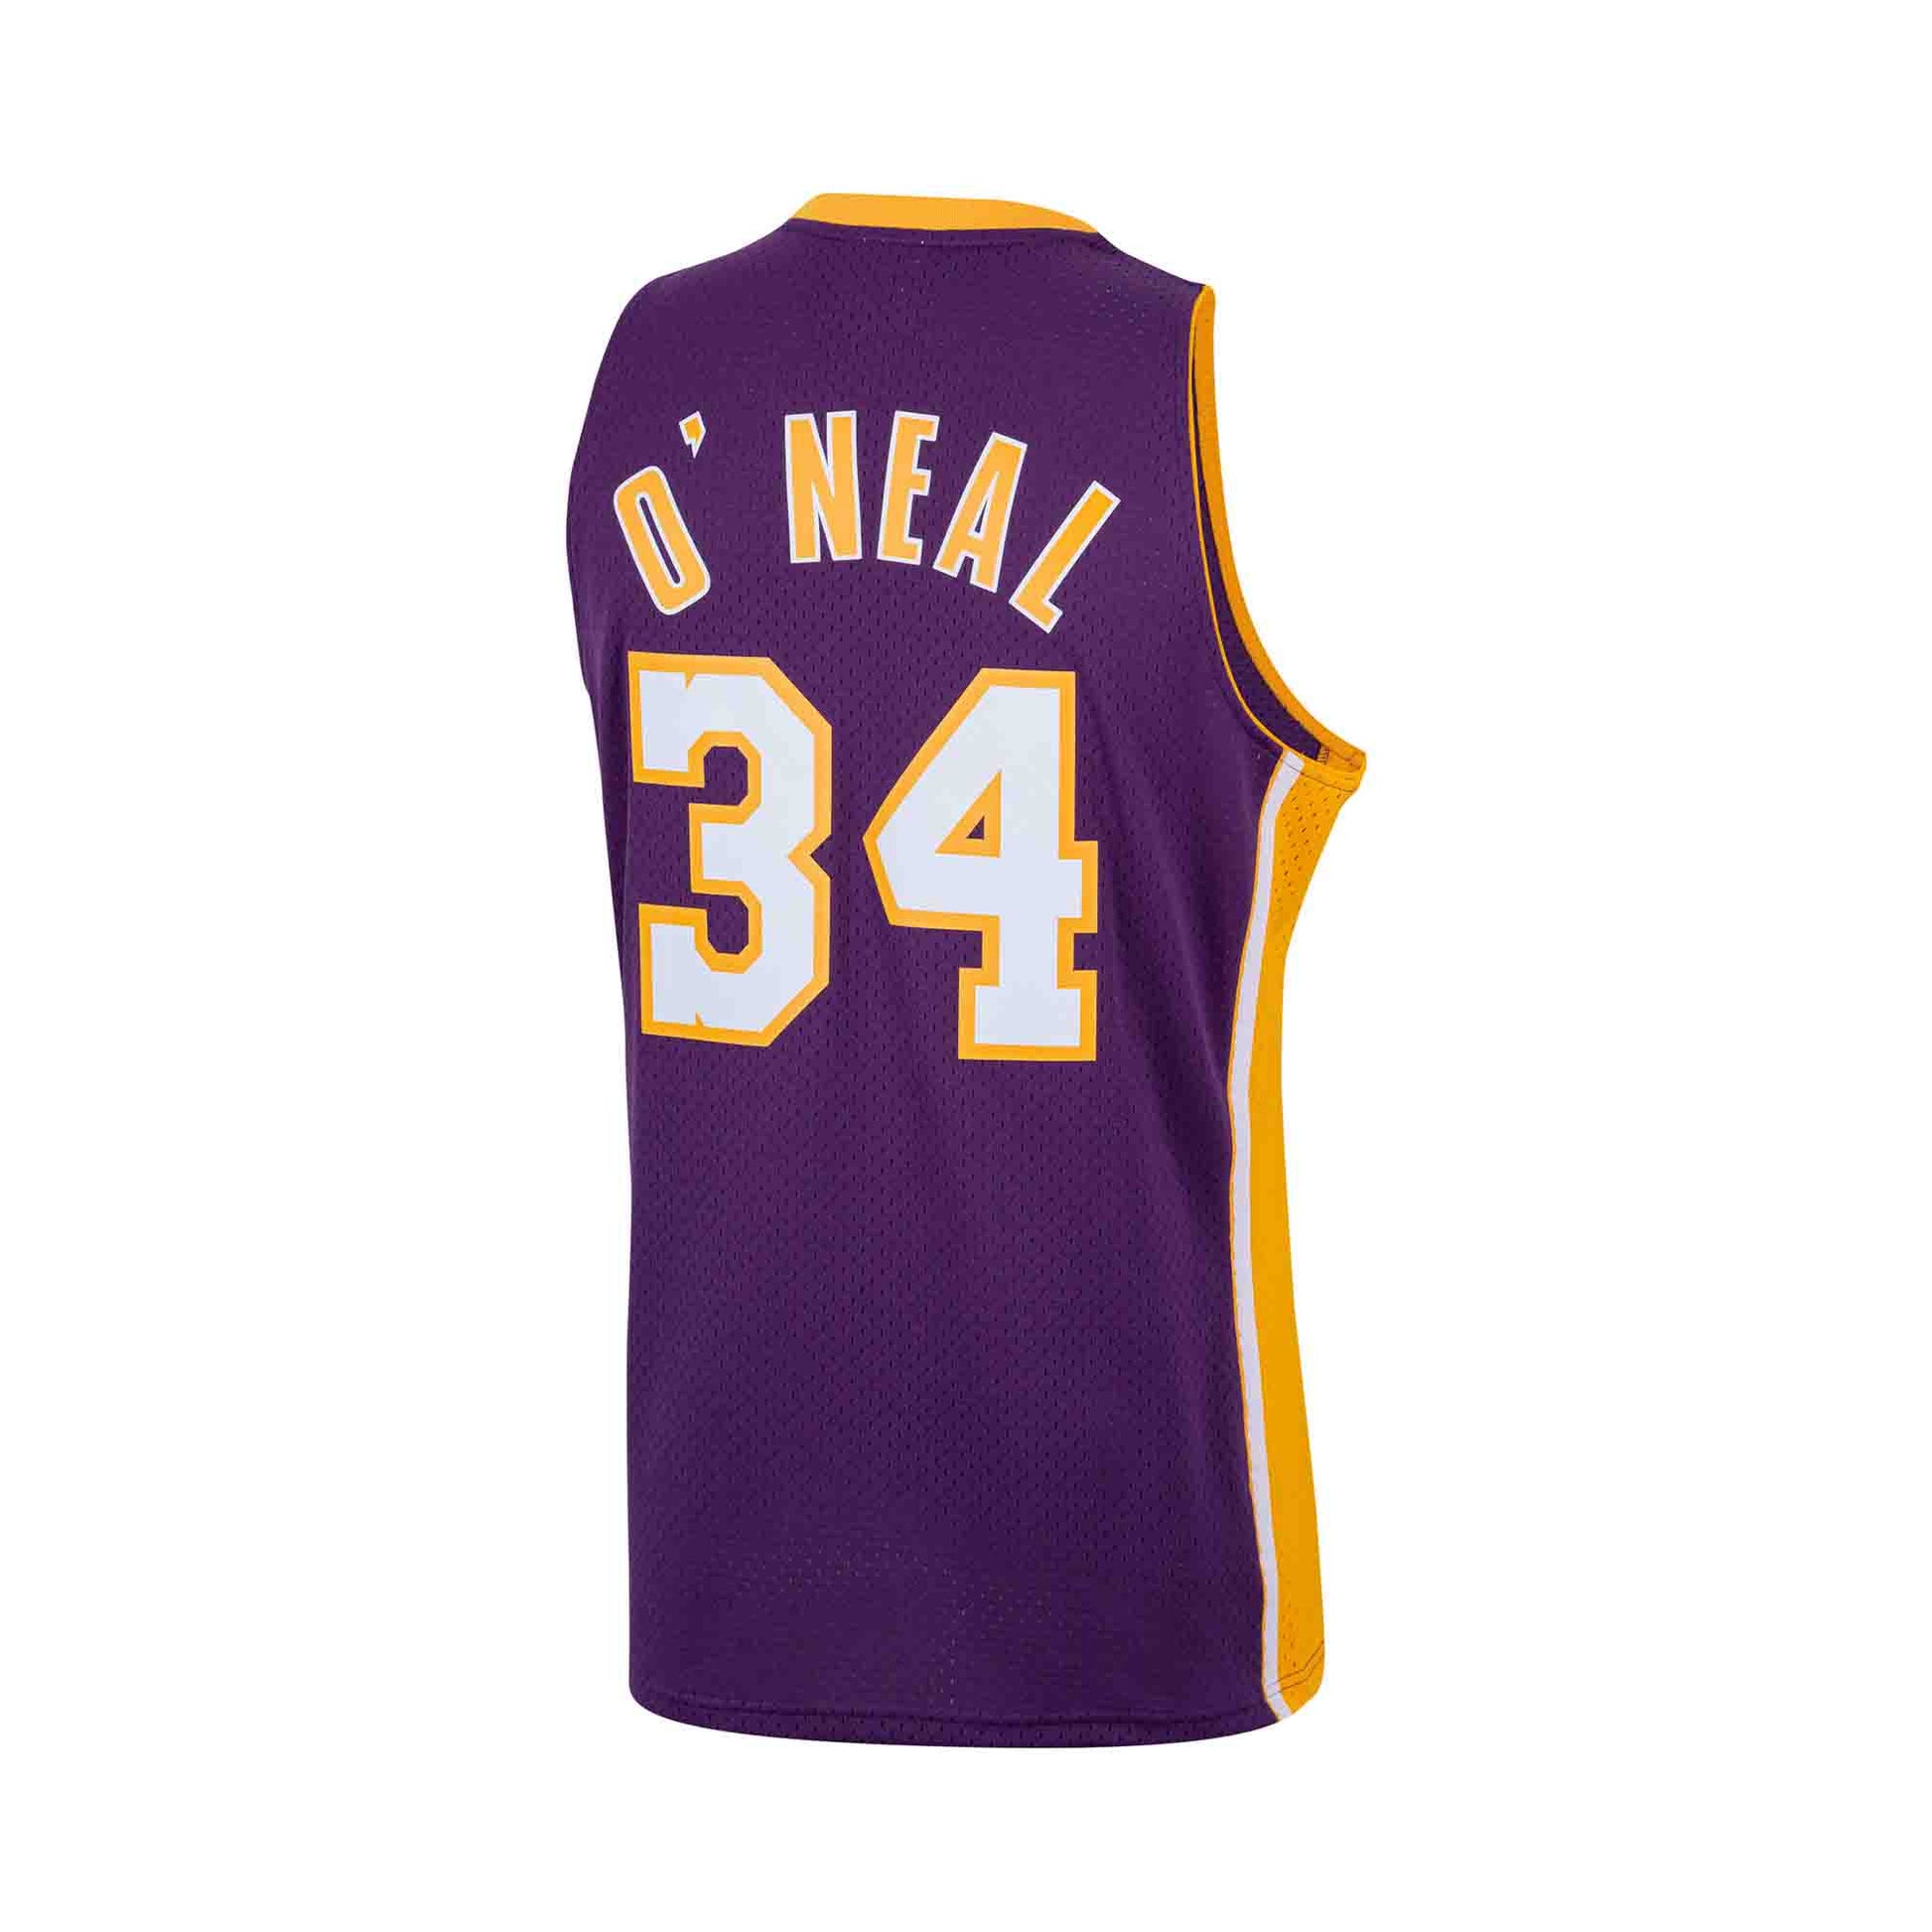 Shaquille O'Neal 34 Los Angeles Lakers 1999-00 Mitchell & Ness